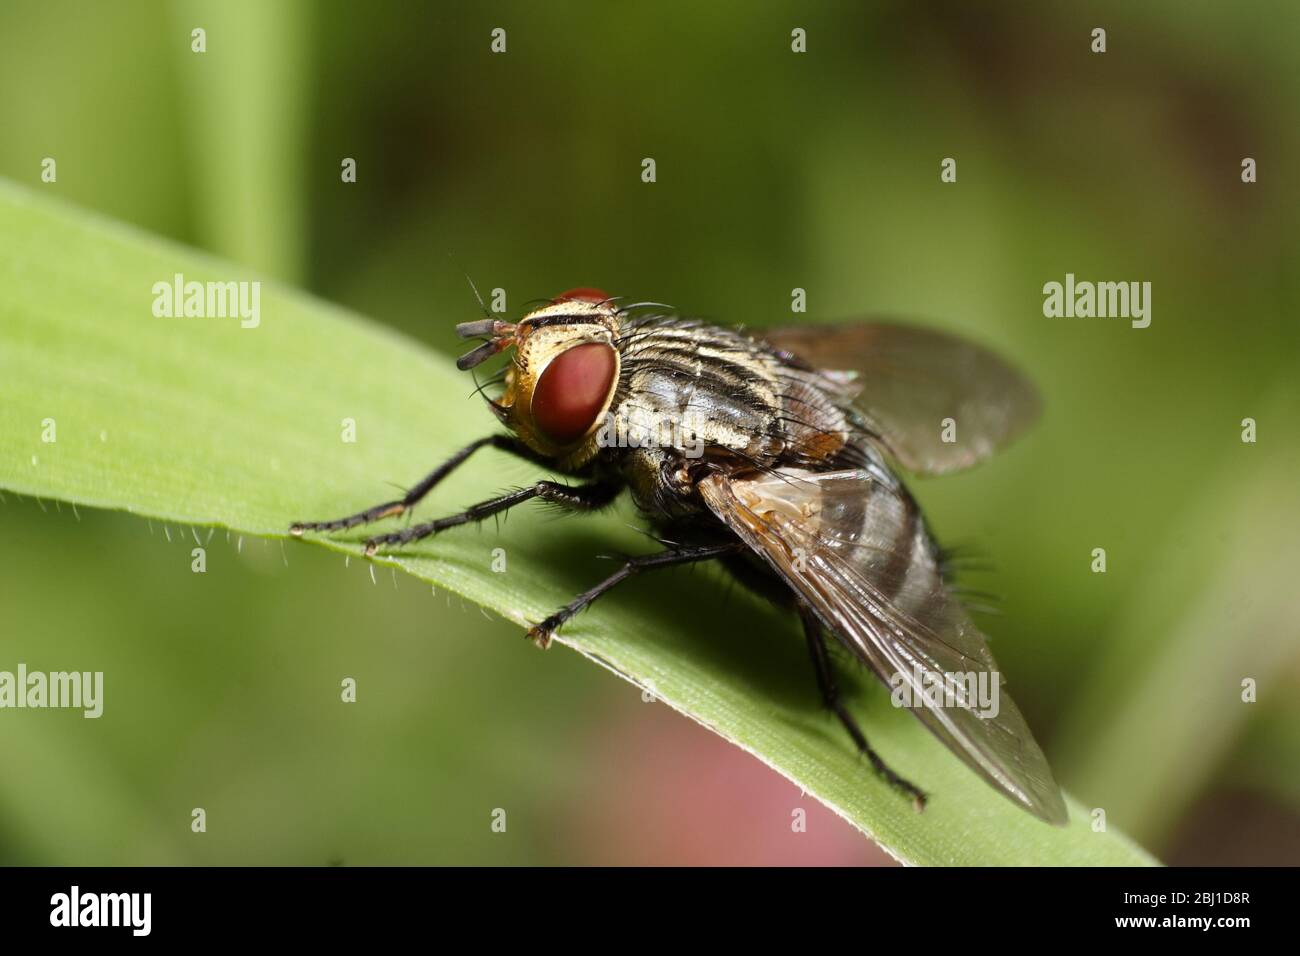 Common Blow Fly resting on a blade of grass, close up. Stock Photo